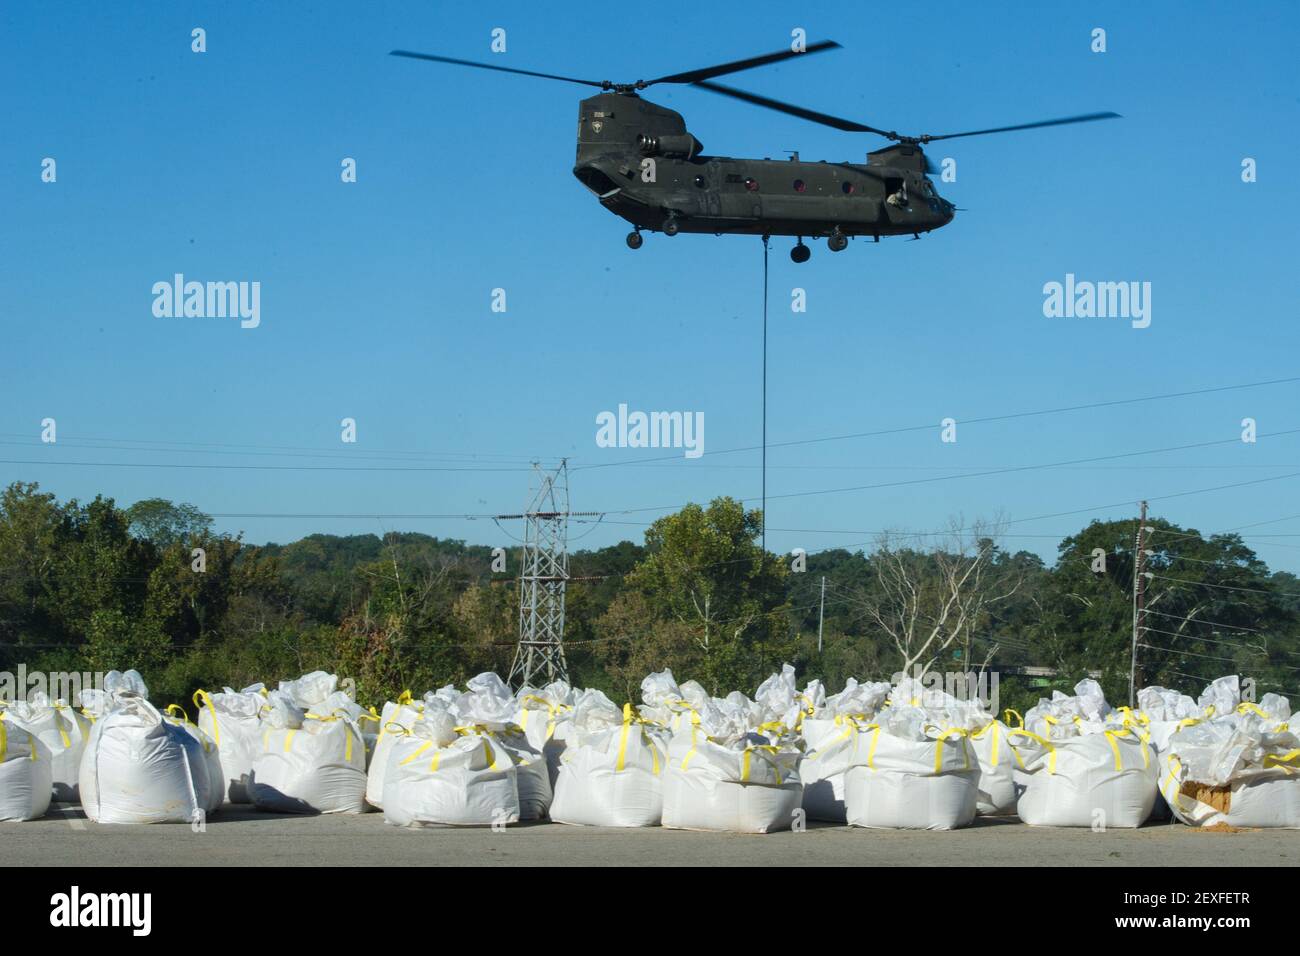 U.S. Soldiers from the 2-238th General Support Aviation Battalion, South Carolina Army National Guard, deliver sandbags with a CH-47 Chinook helicopter to dam the breached canal at the Riverfront Canal Park in Columbia, S.C., Oct. 7, 2015. The South Carolina National Guard has been activated to support state and county emergency management agencies and local first responders as historic flooding impacts counties statewide. Currently, more than 2,600 South Carolina National Guard members have been activated in response to the floods. (Photo by Tech. Sgt. Jorge Intriago/U.S. Air National Guard)  Stock Photo